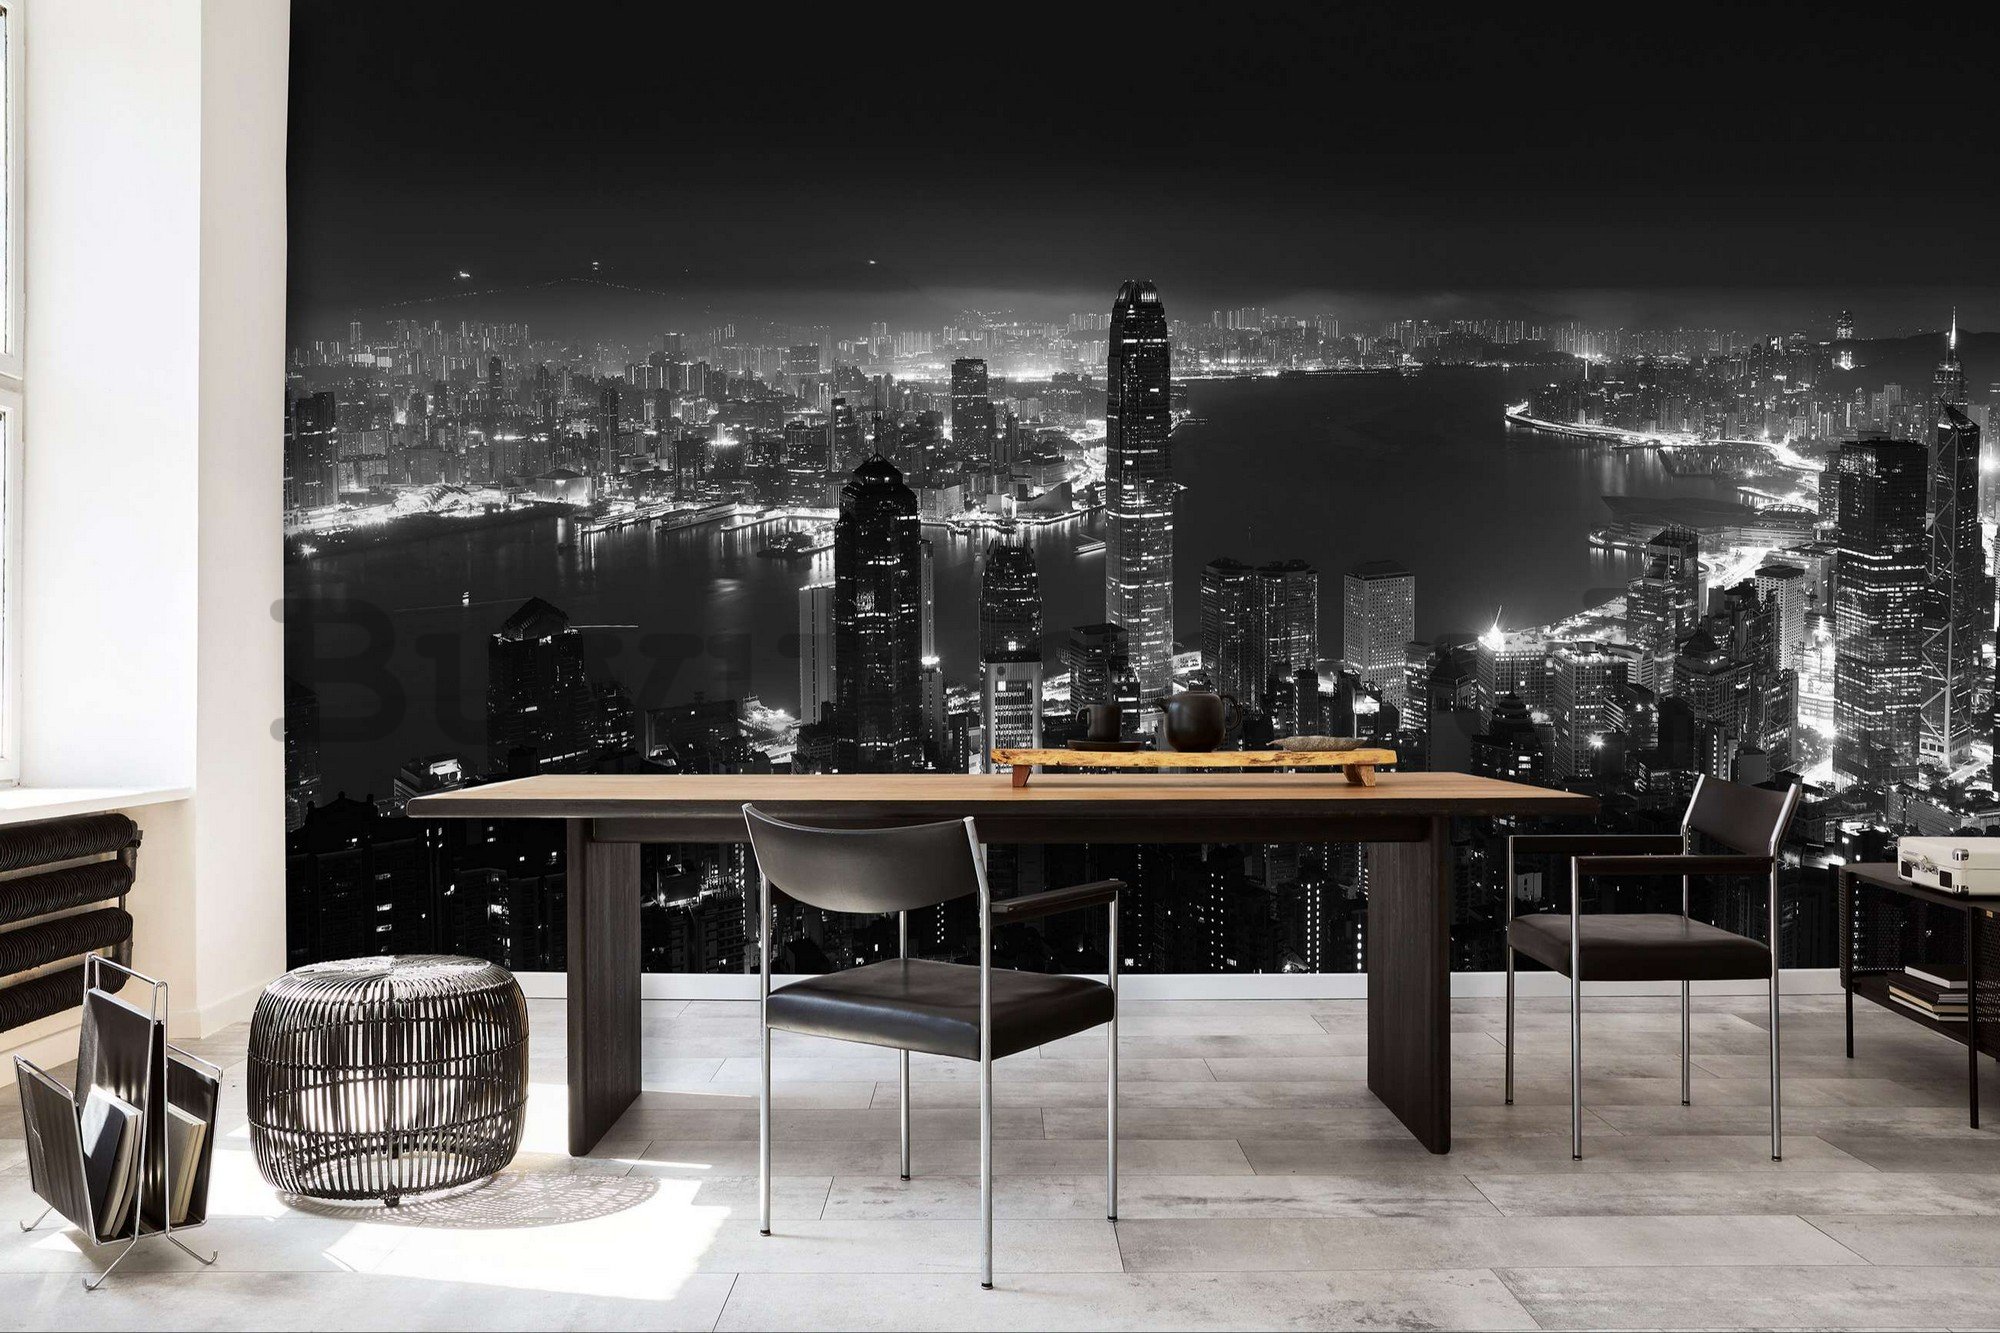 Wall mural vlies: Panorama of a big city (black and white) - 254x184 cm